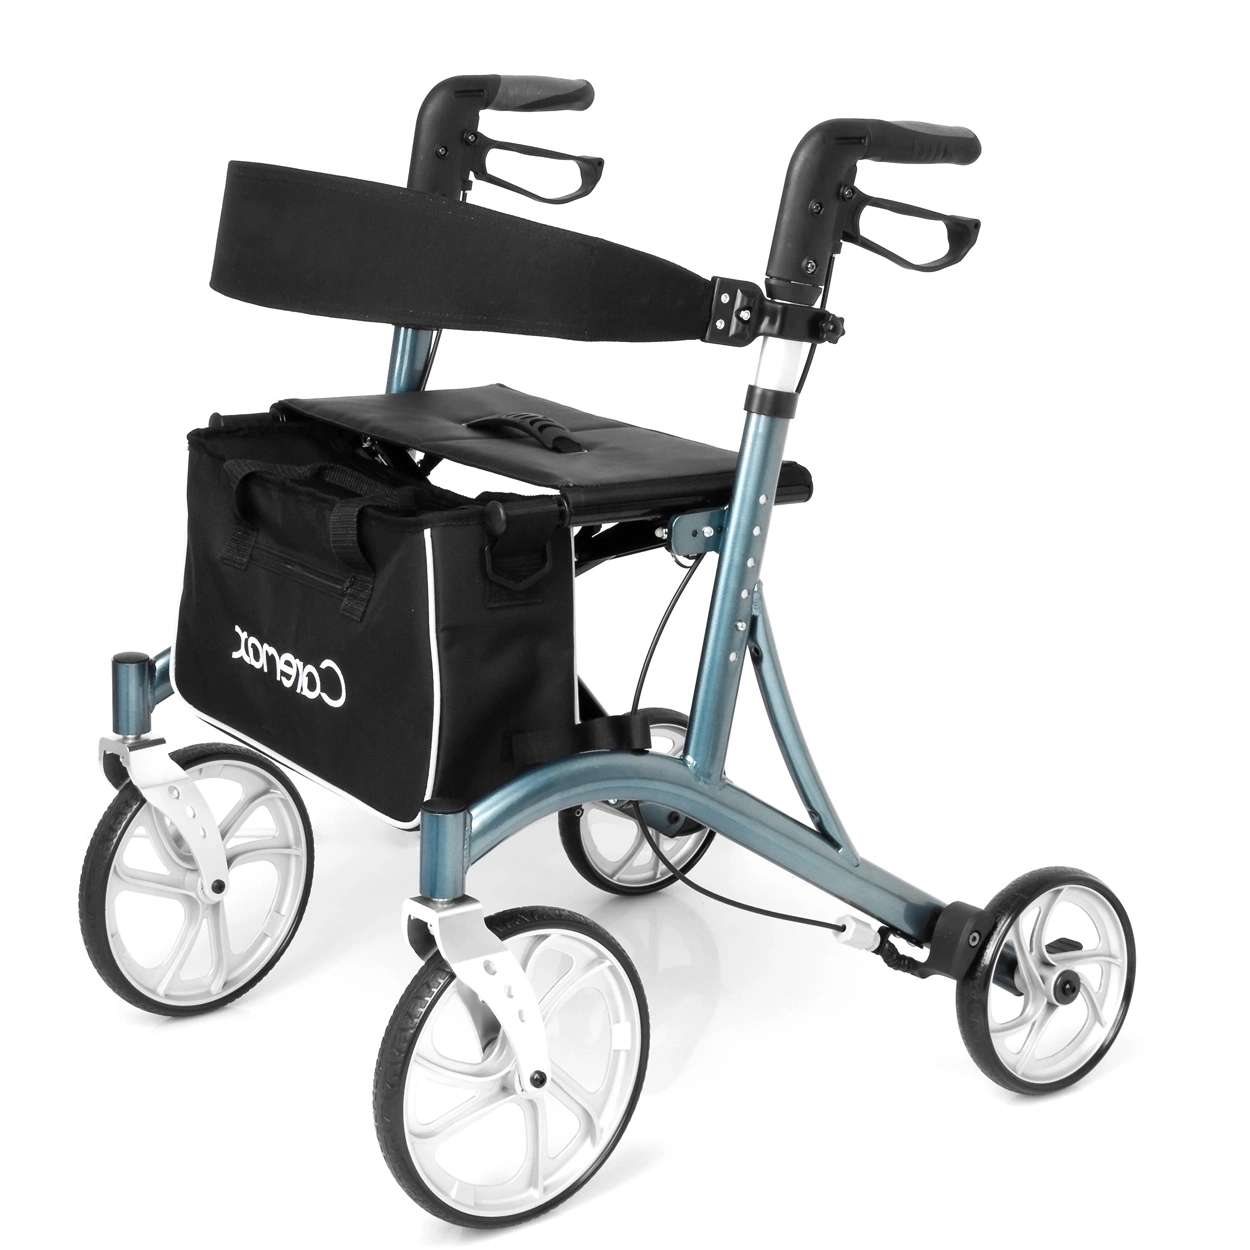 Medical Health Care Product Four Wheels Rollator Walker with Shopping Bag